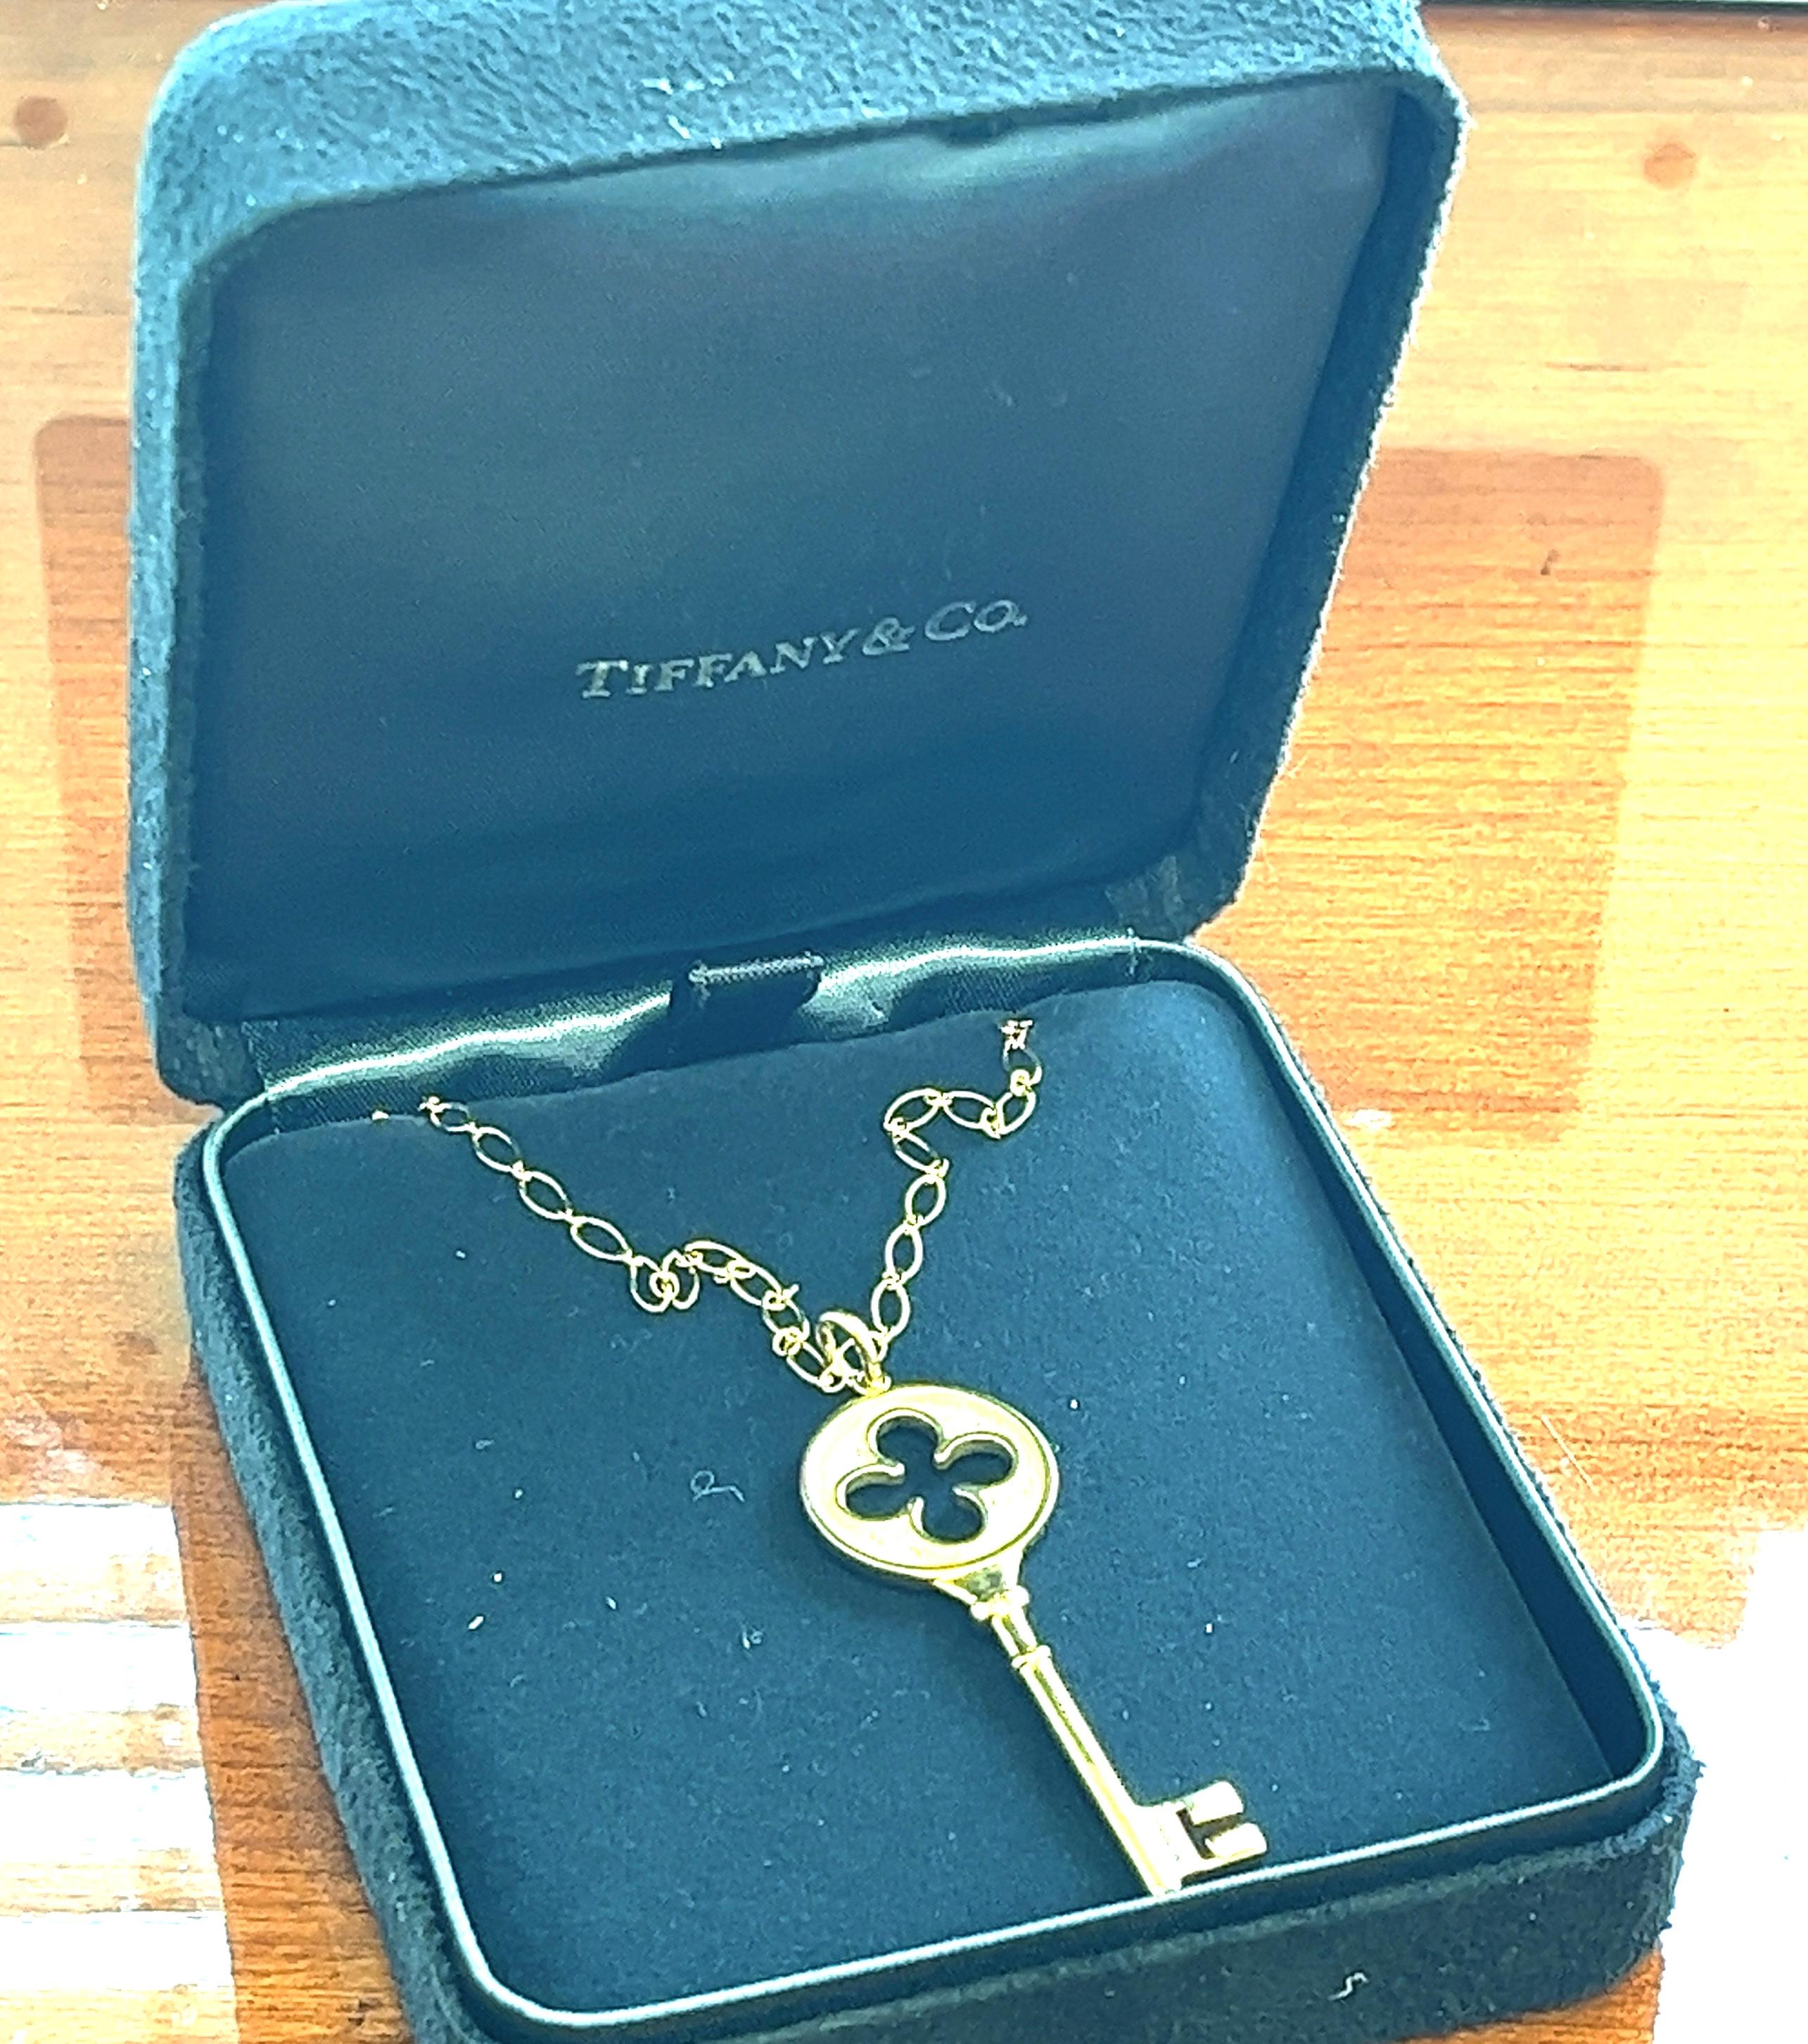 Offered here is a Tiffany & Co. Clover Leaf Key Pendant in 18kt yellow gold with diamonds.

Brilliant beacons of optimism and hope, Tiffany keys are radiant symbols of a bright future.
A timeless elegant design, this lucky charm pendant shines with